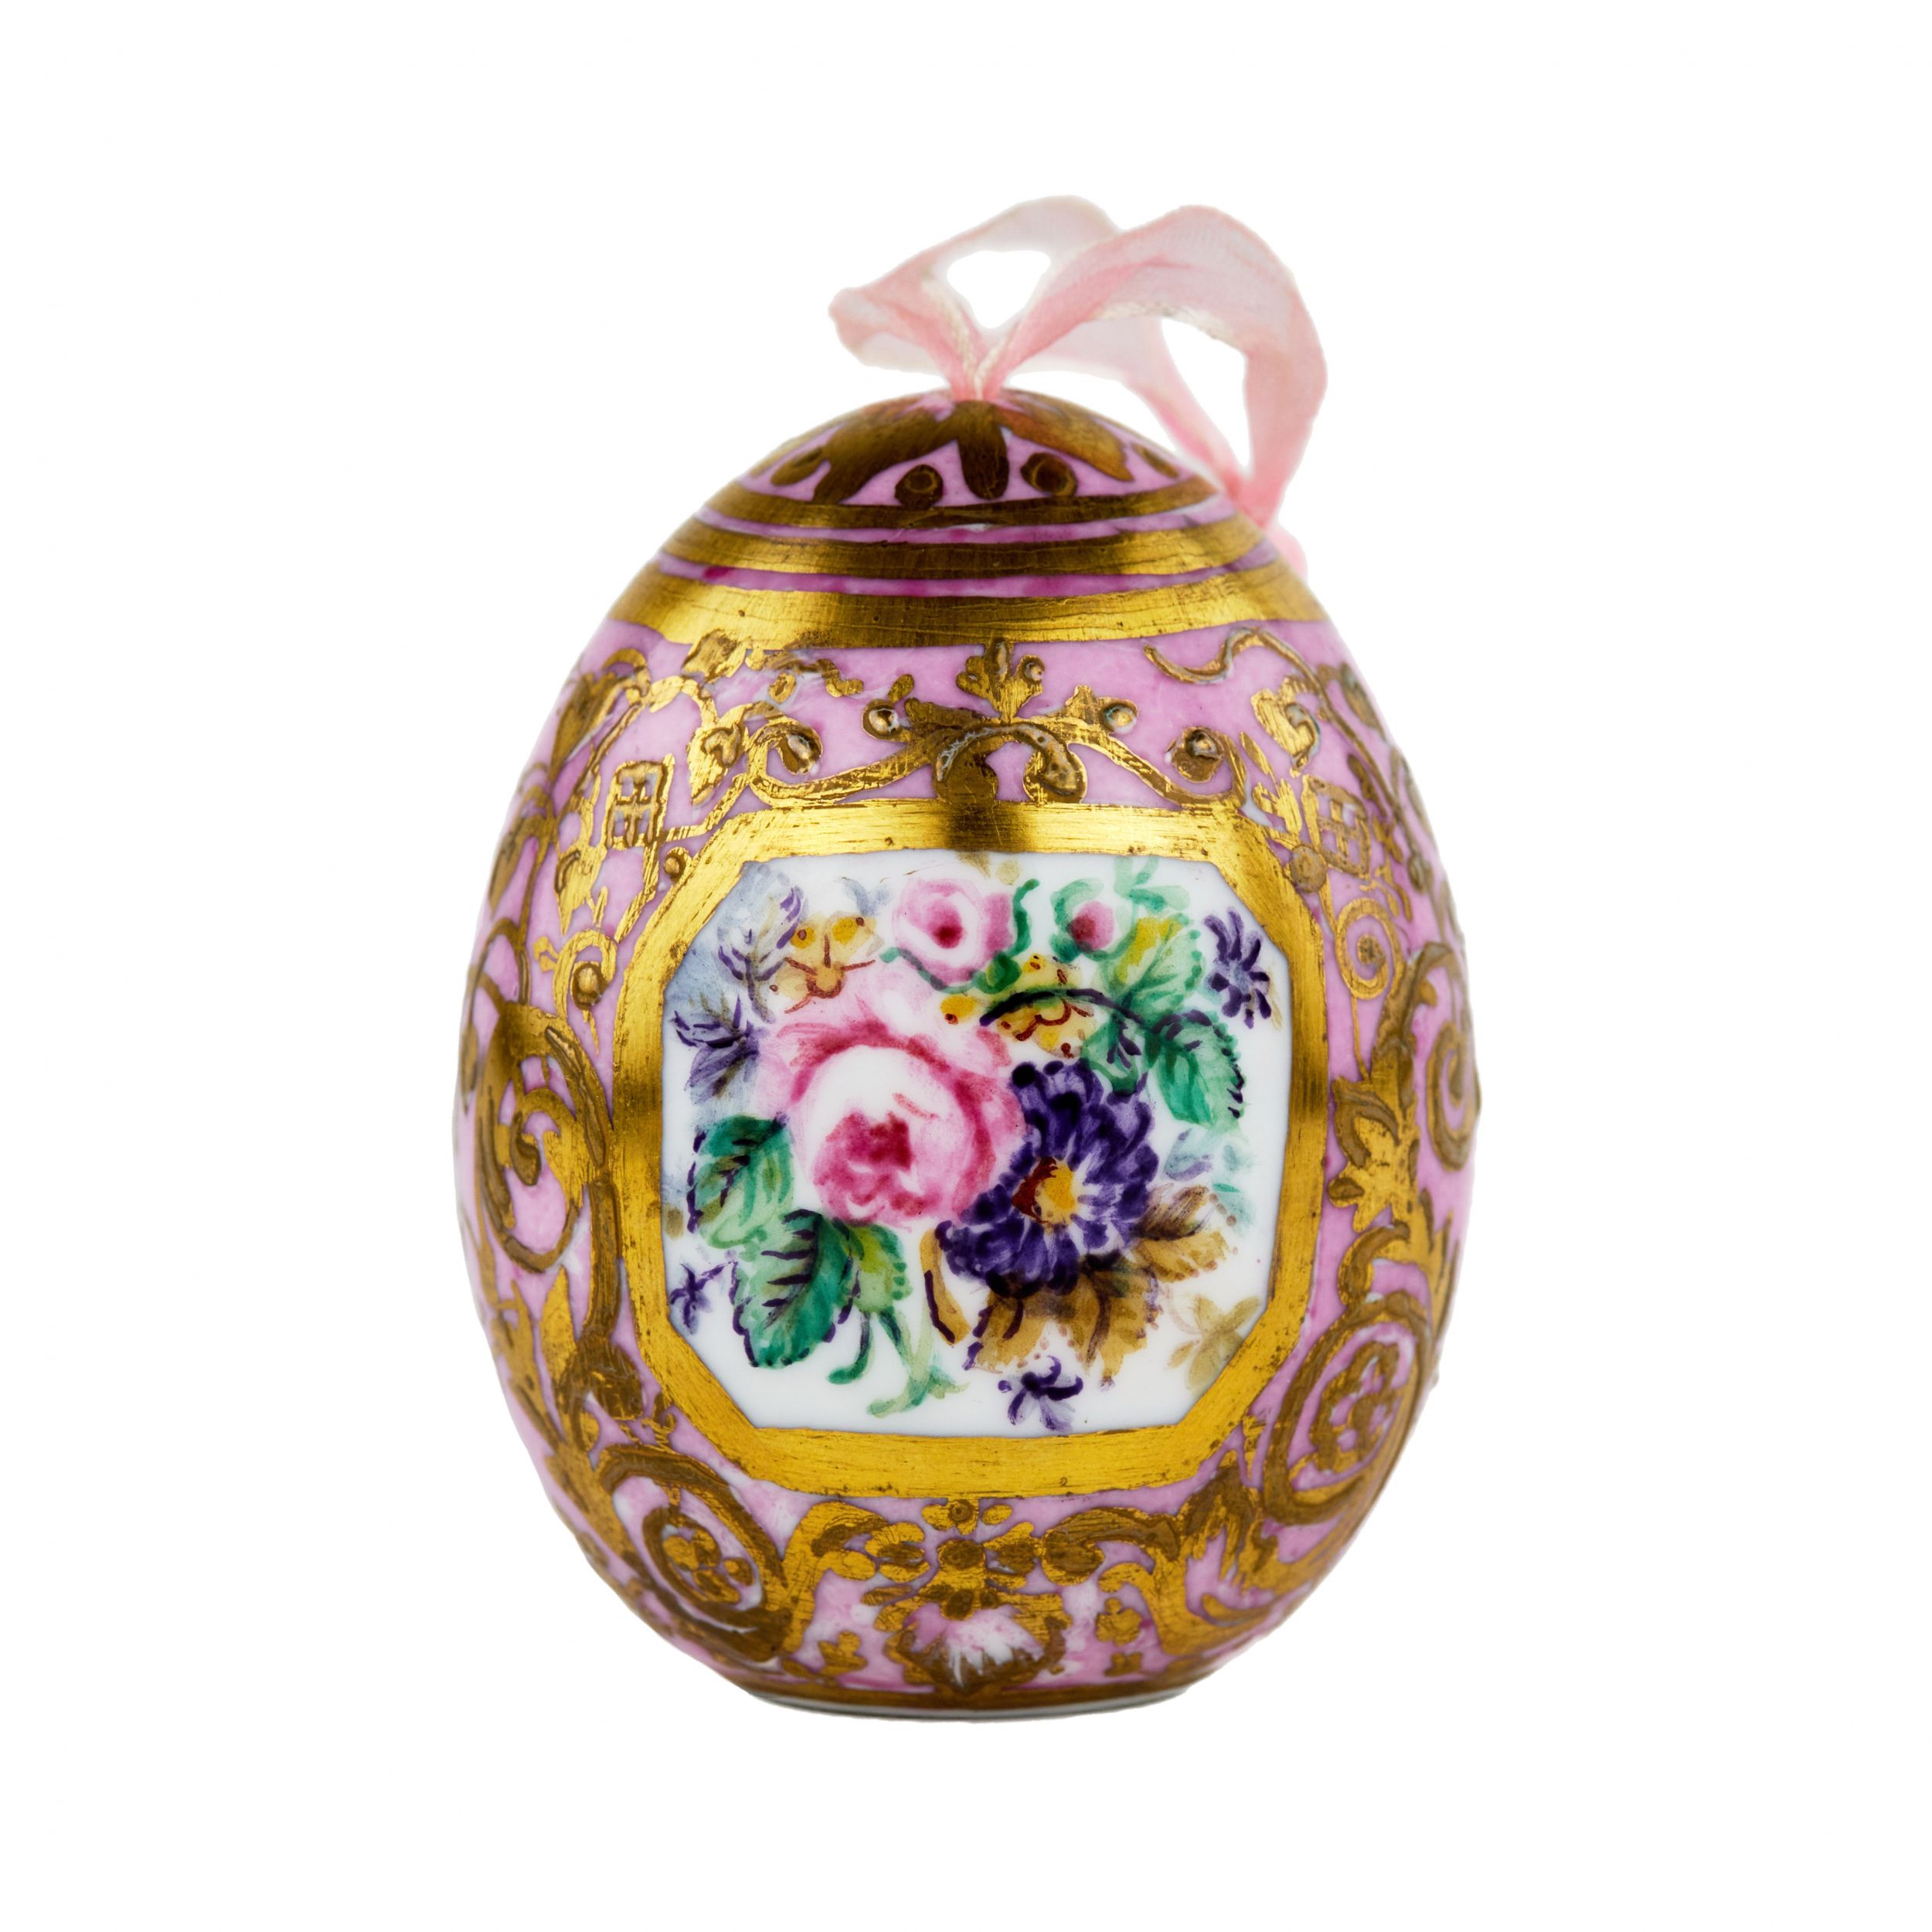 Russian-painted-Easter-egg-made-of-porcelain-